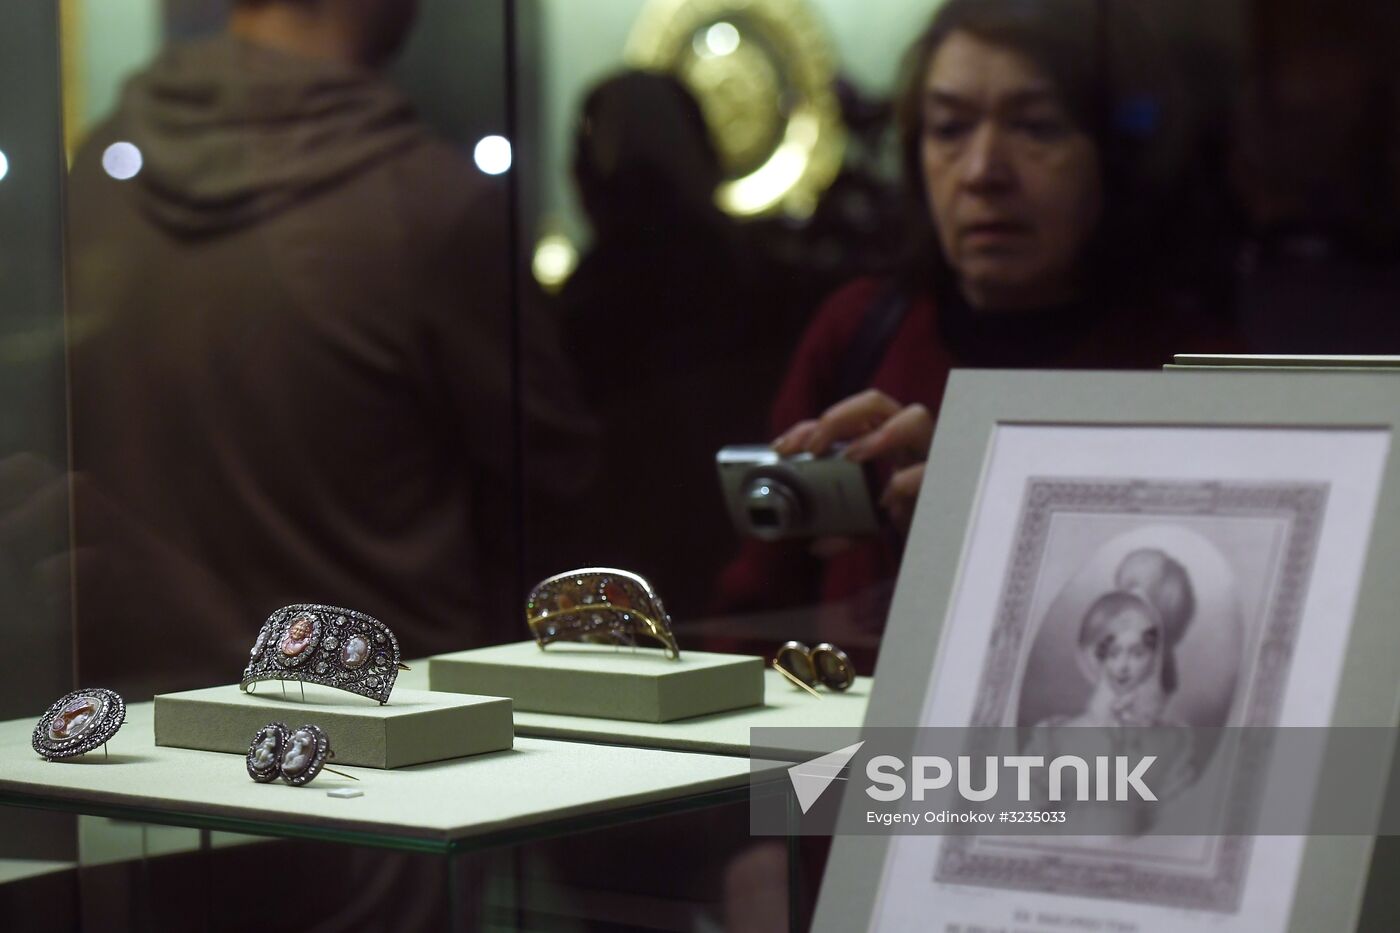 "National Treasures of Russia. The 50th Anniversary of the Diamond Fund Exhibition" exhibition